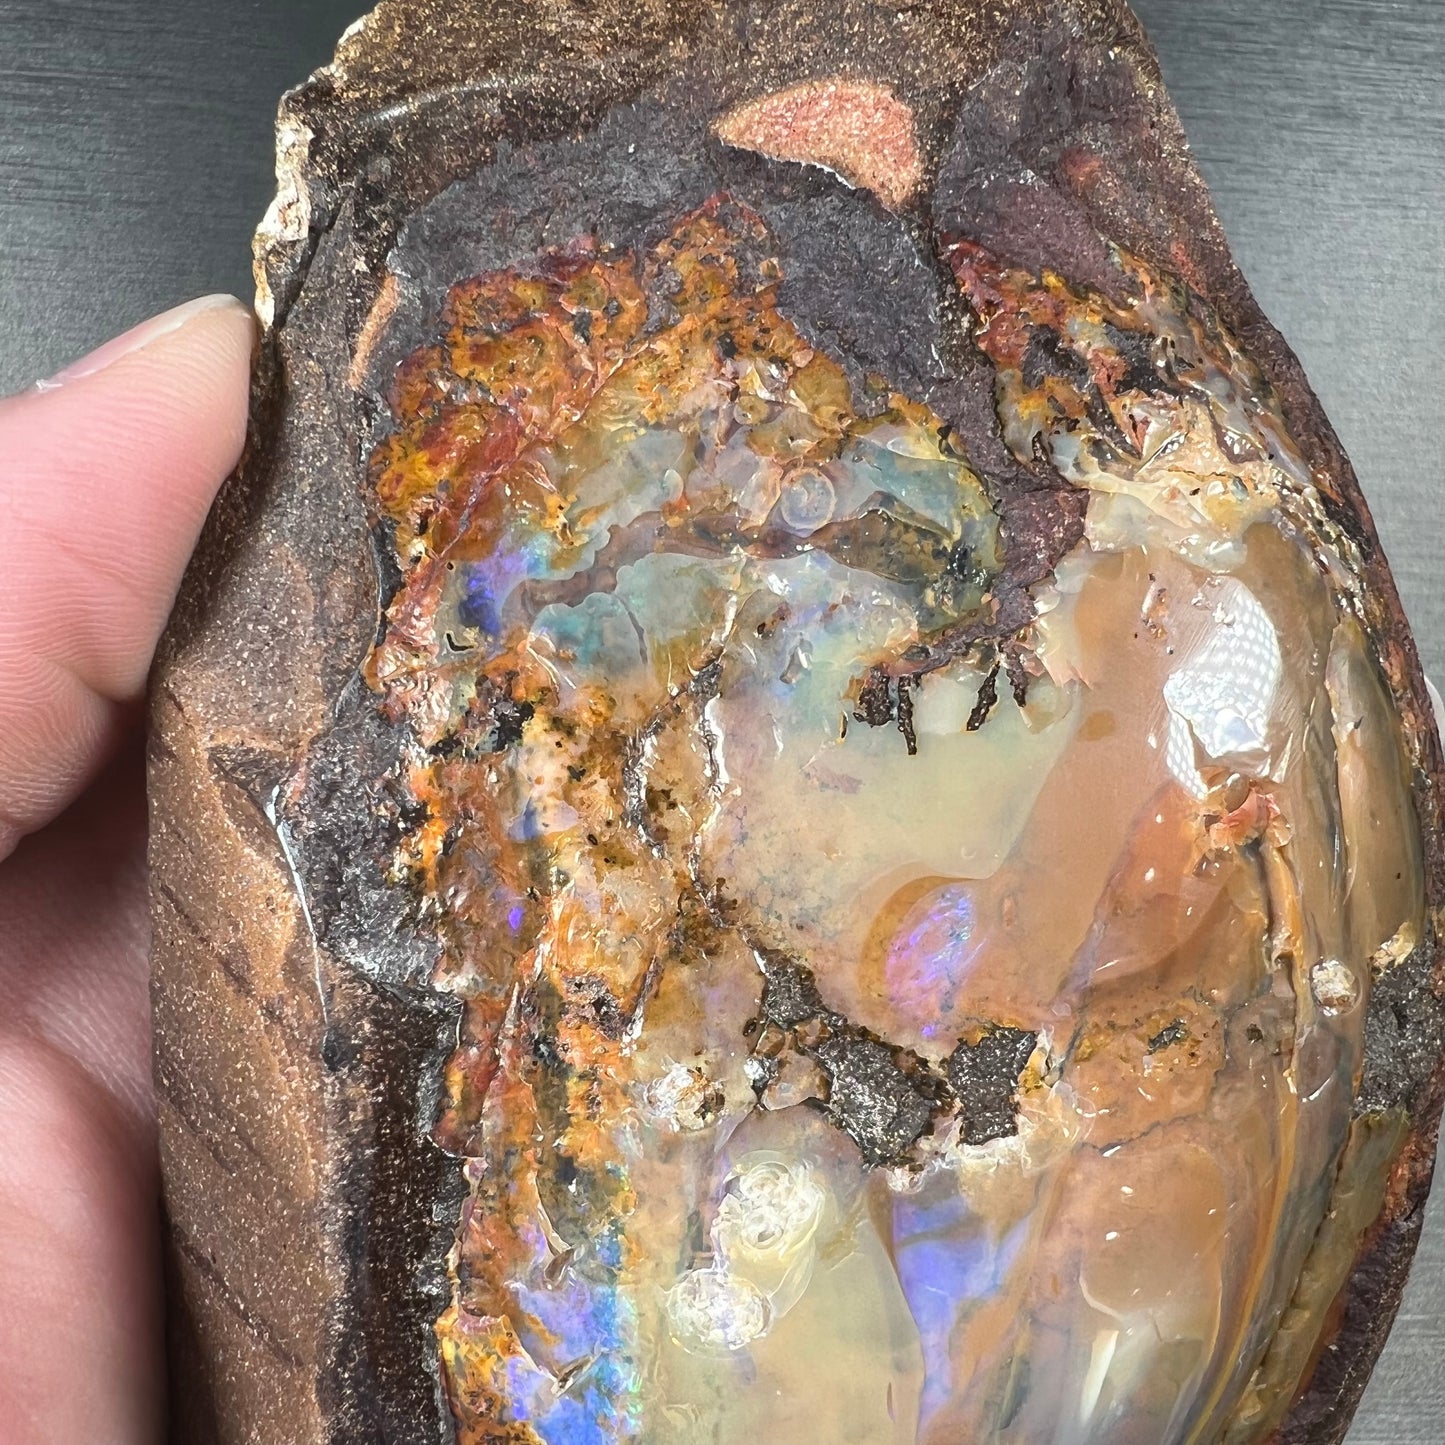 A polished Quilpie boulder opal specimen.  The stone has a stripe of bright blue, green, and purple.